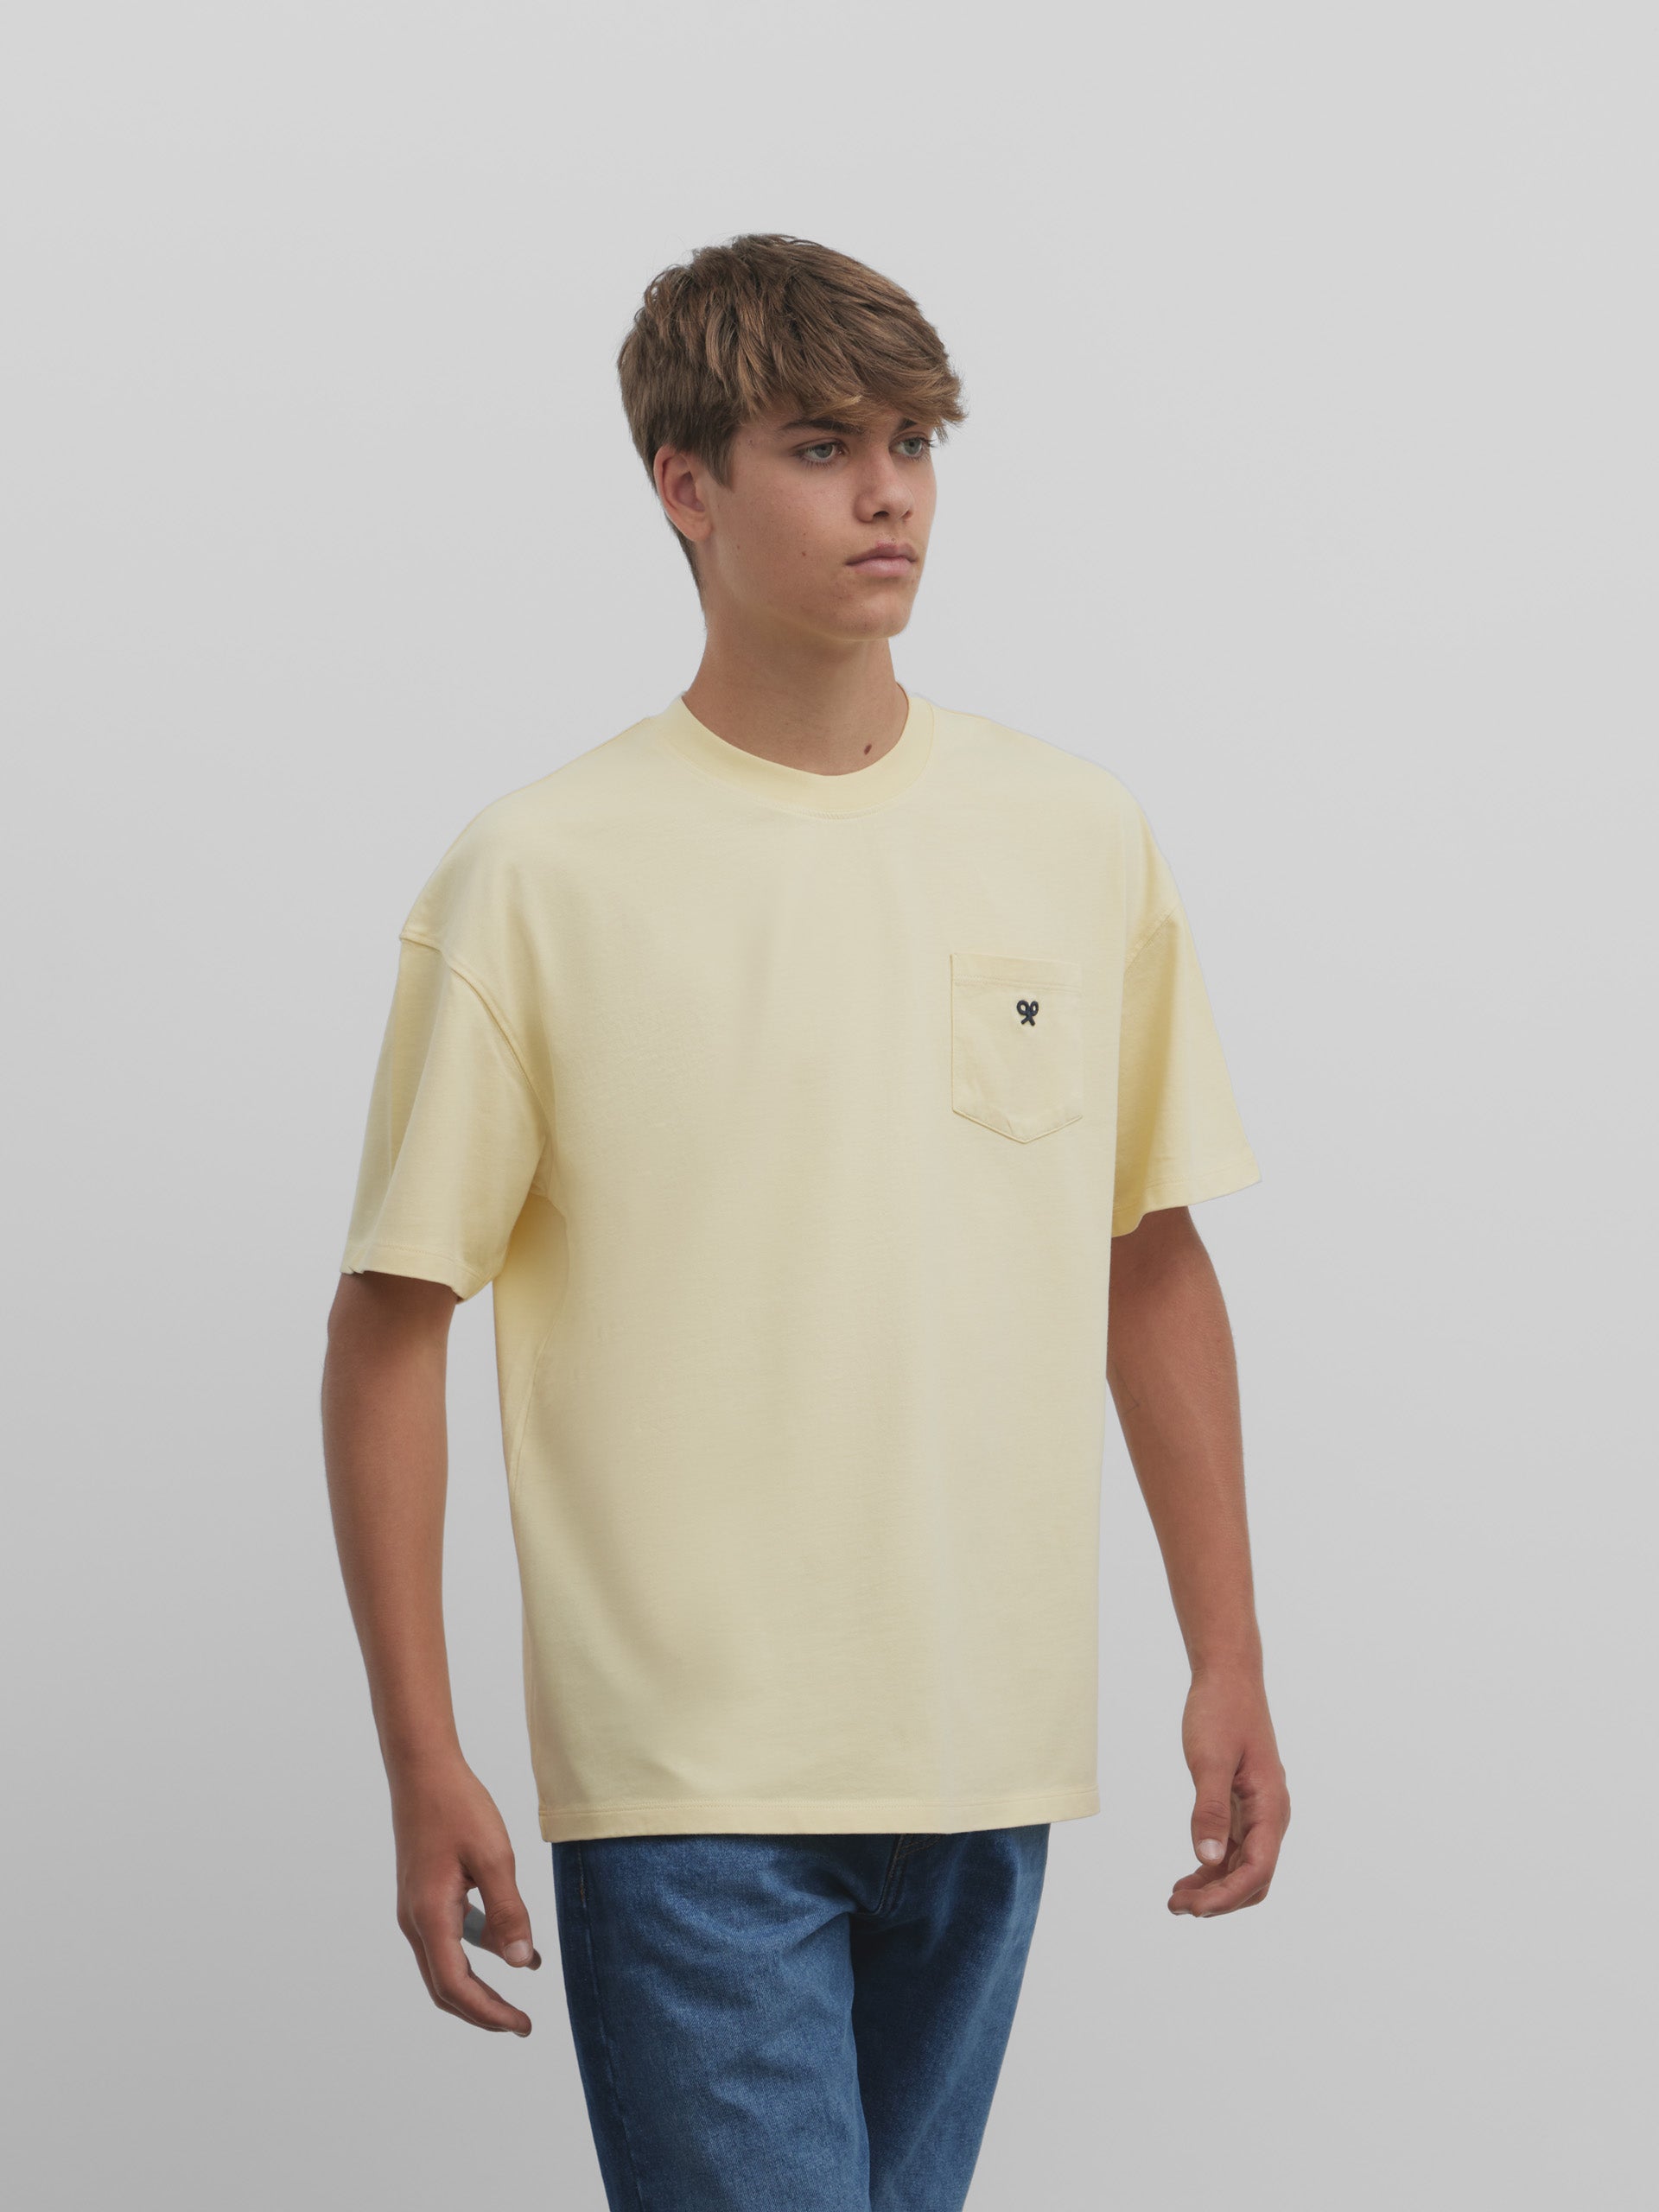 Special fit yellow pocket t-shirt